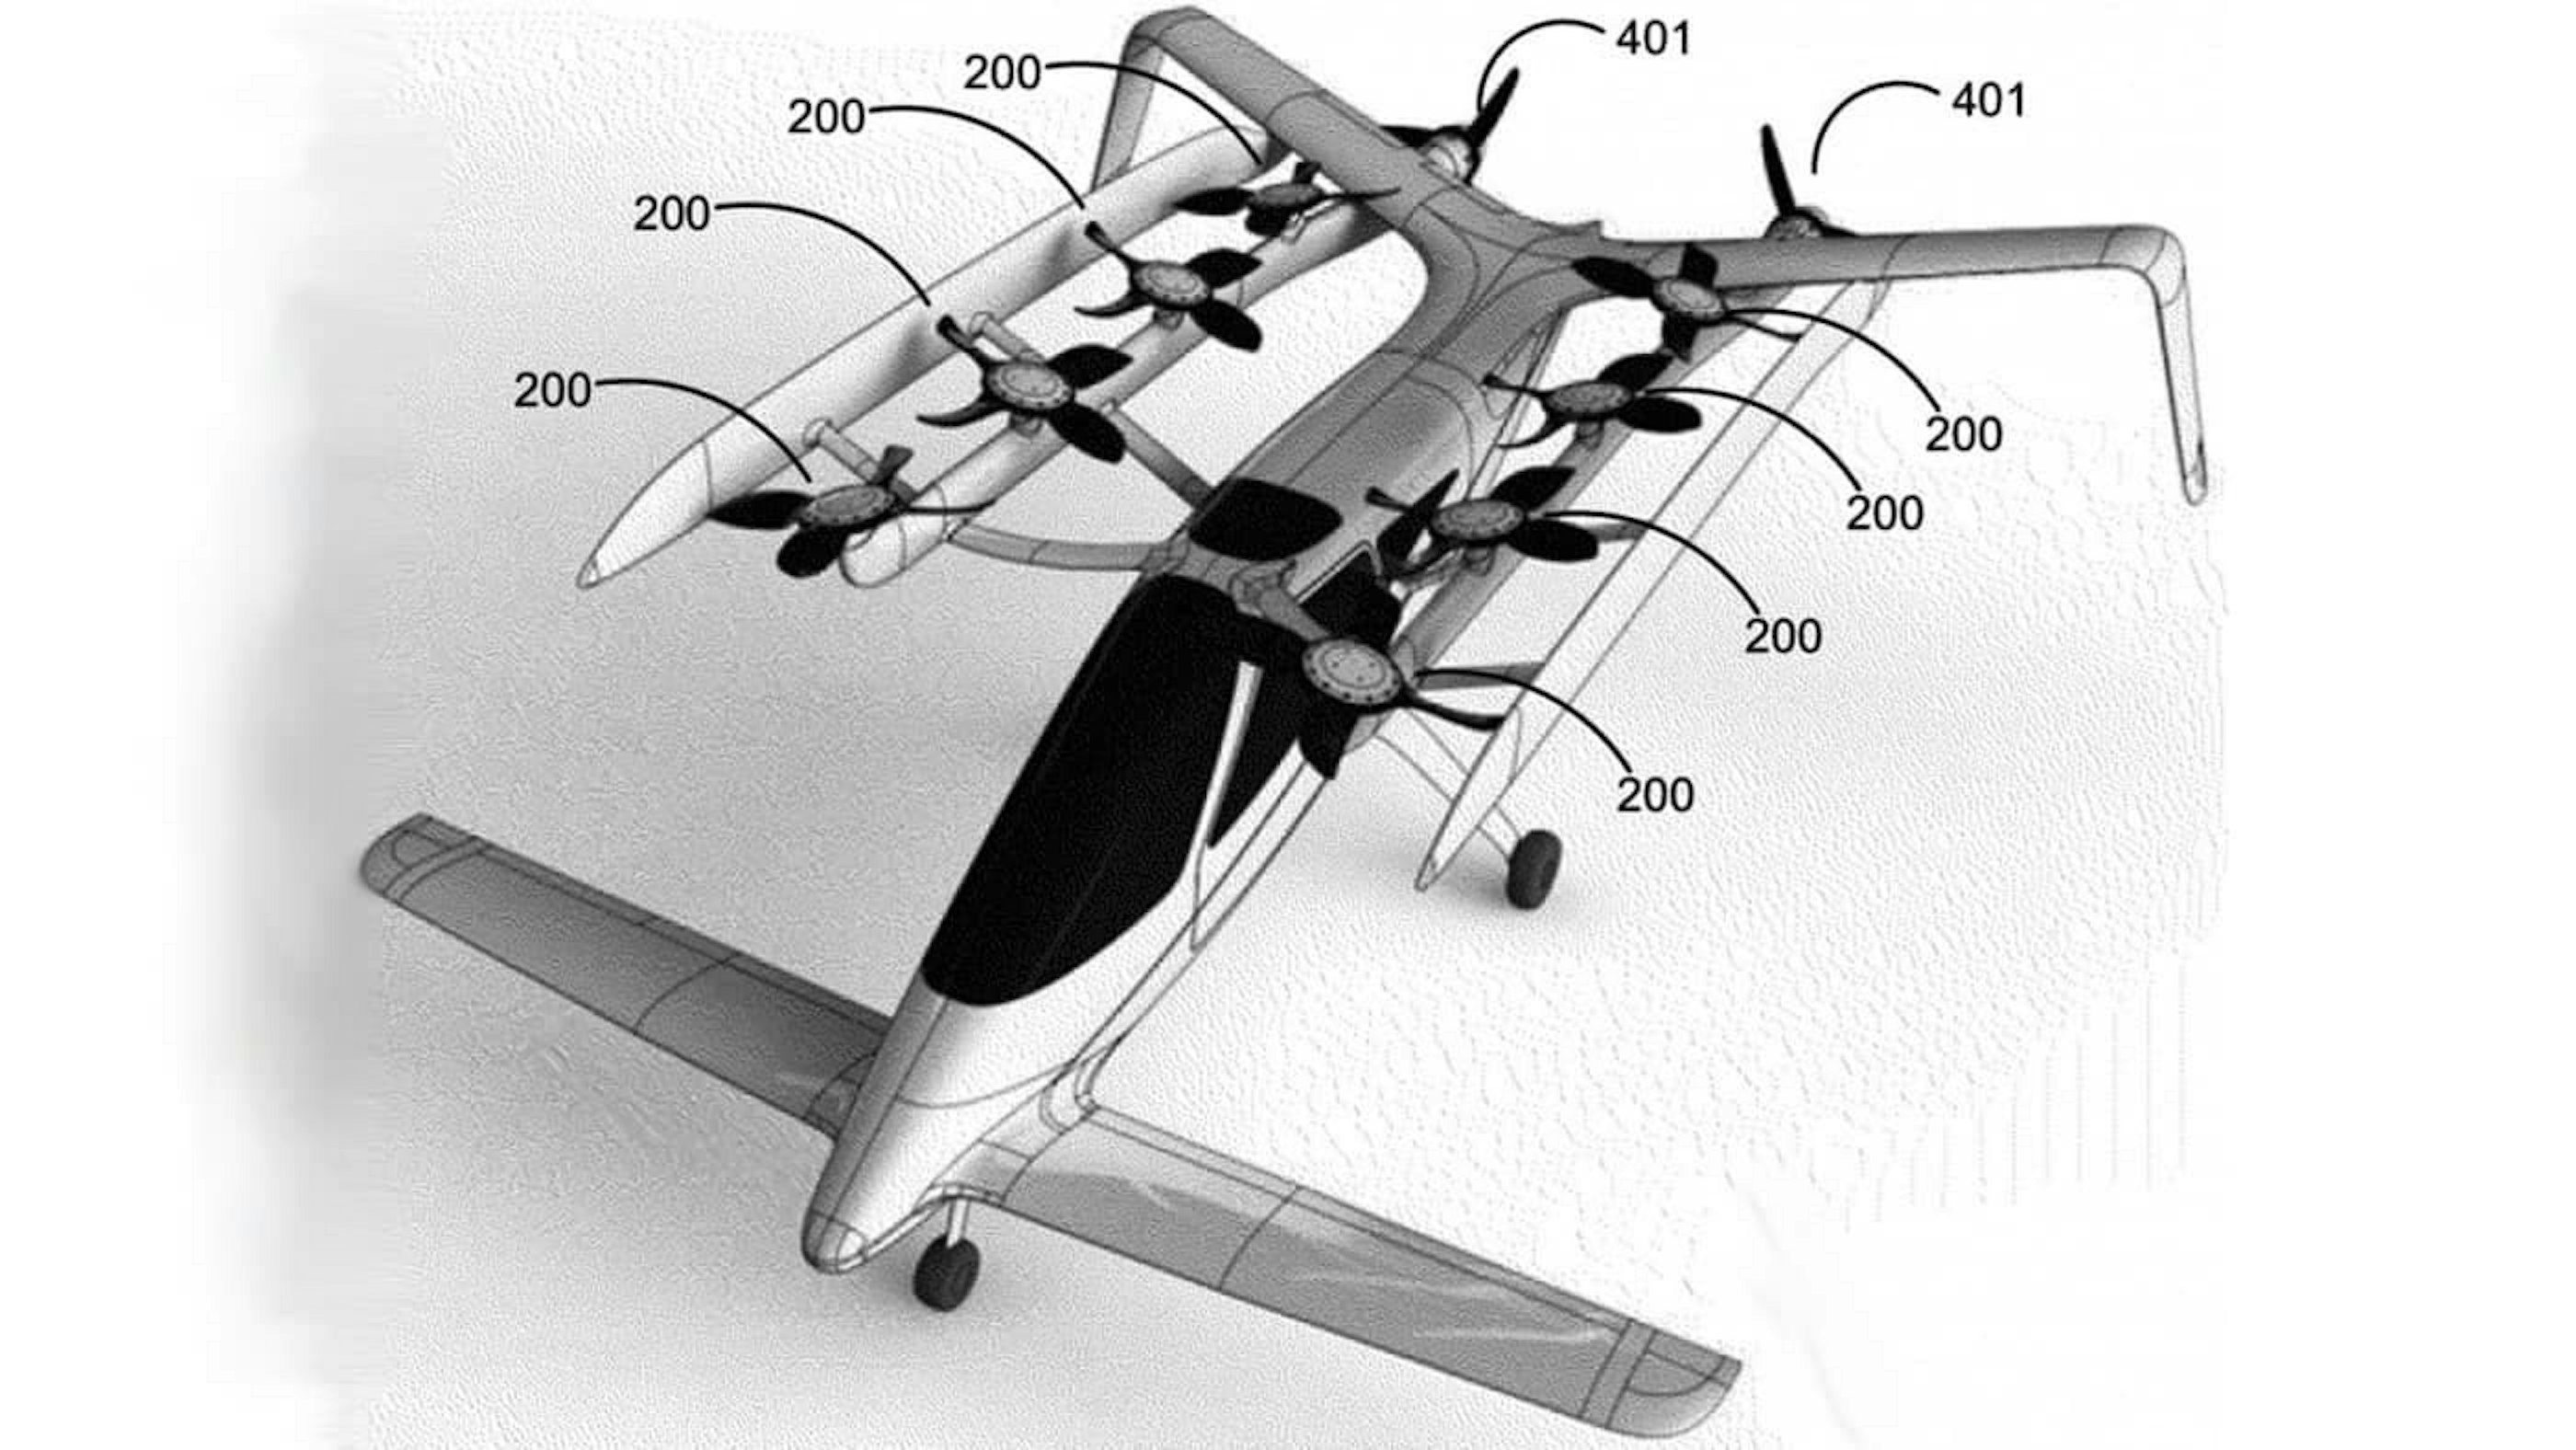 Zee. Aero filed a patent for this flying car in 2013 but only received approval this year. 